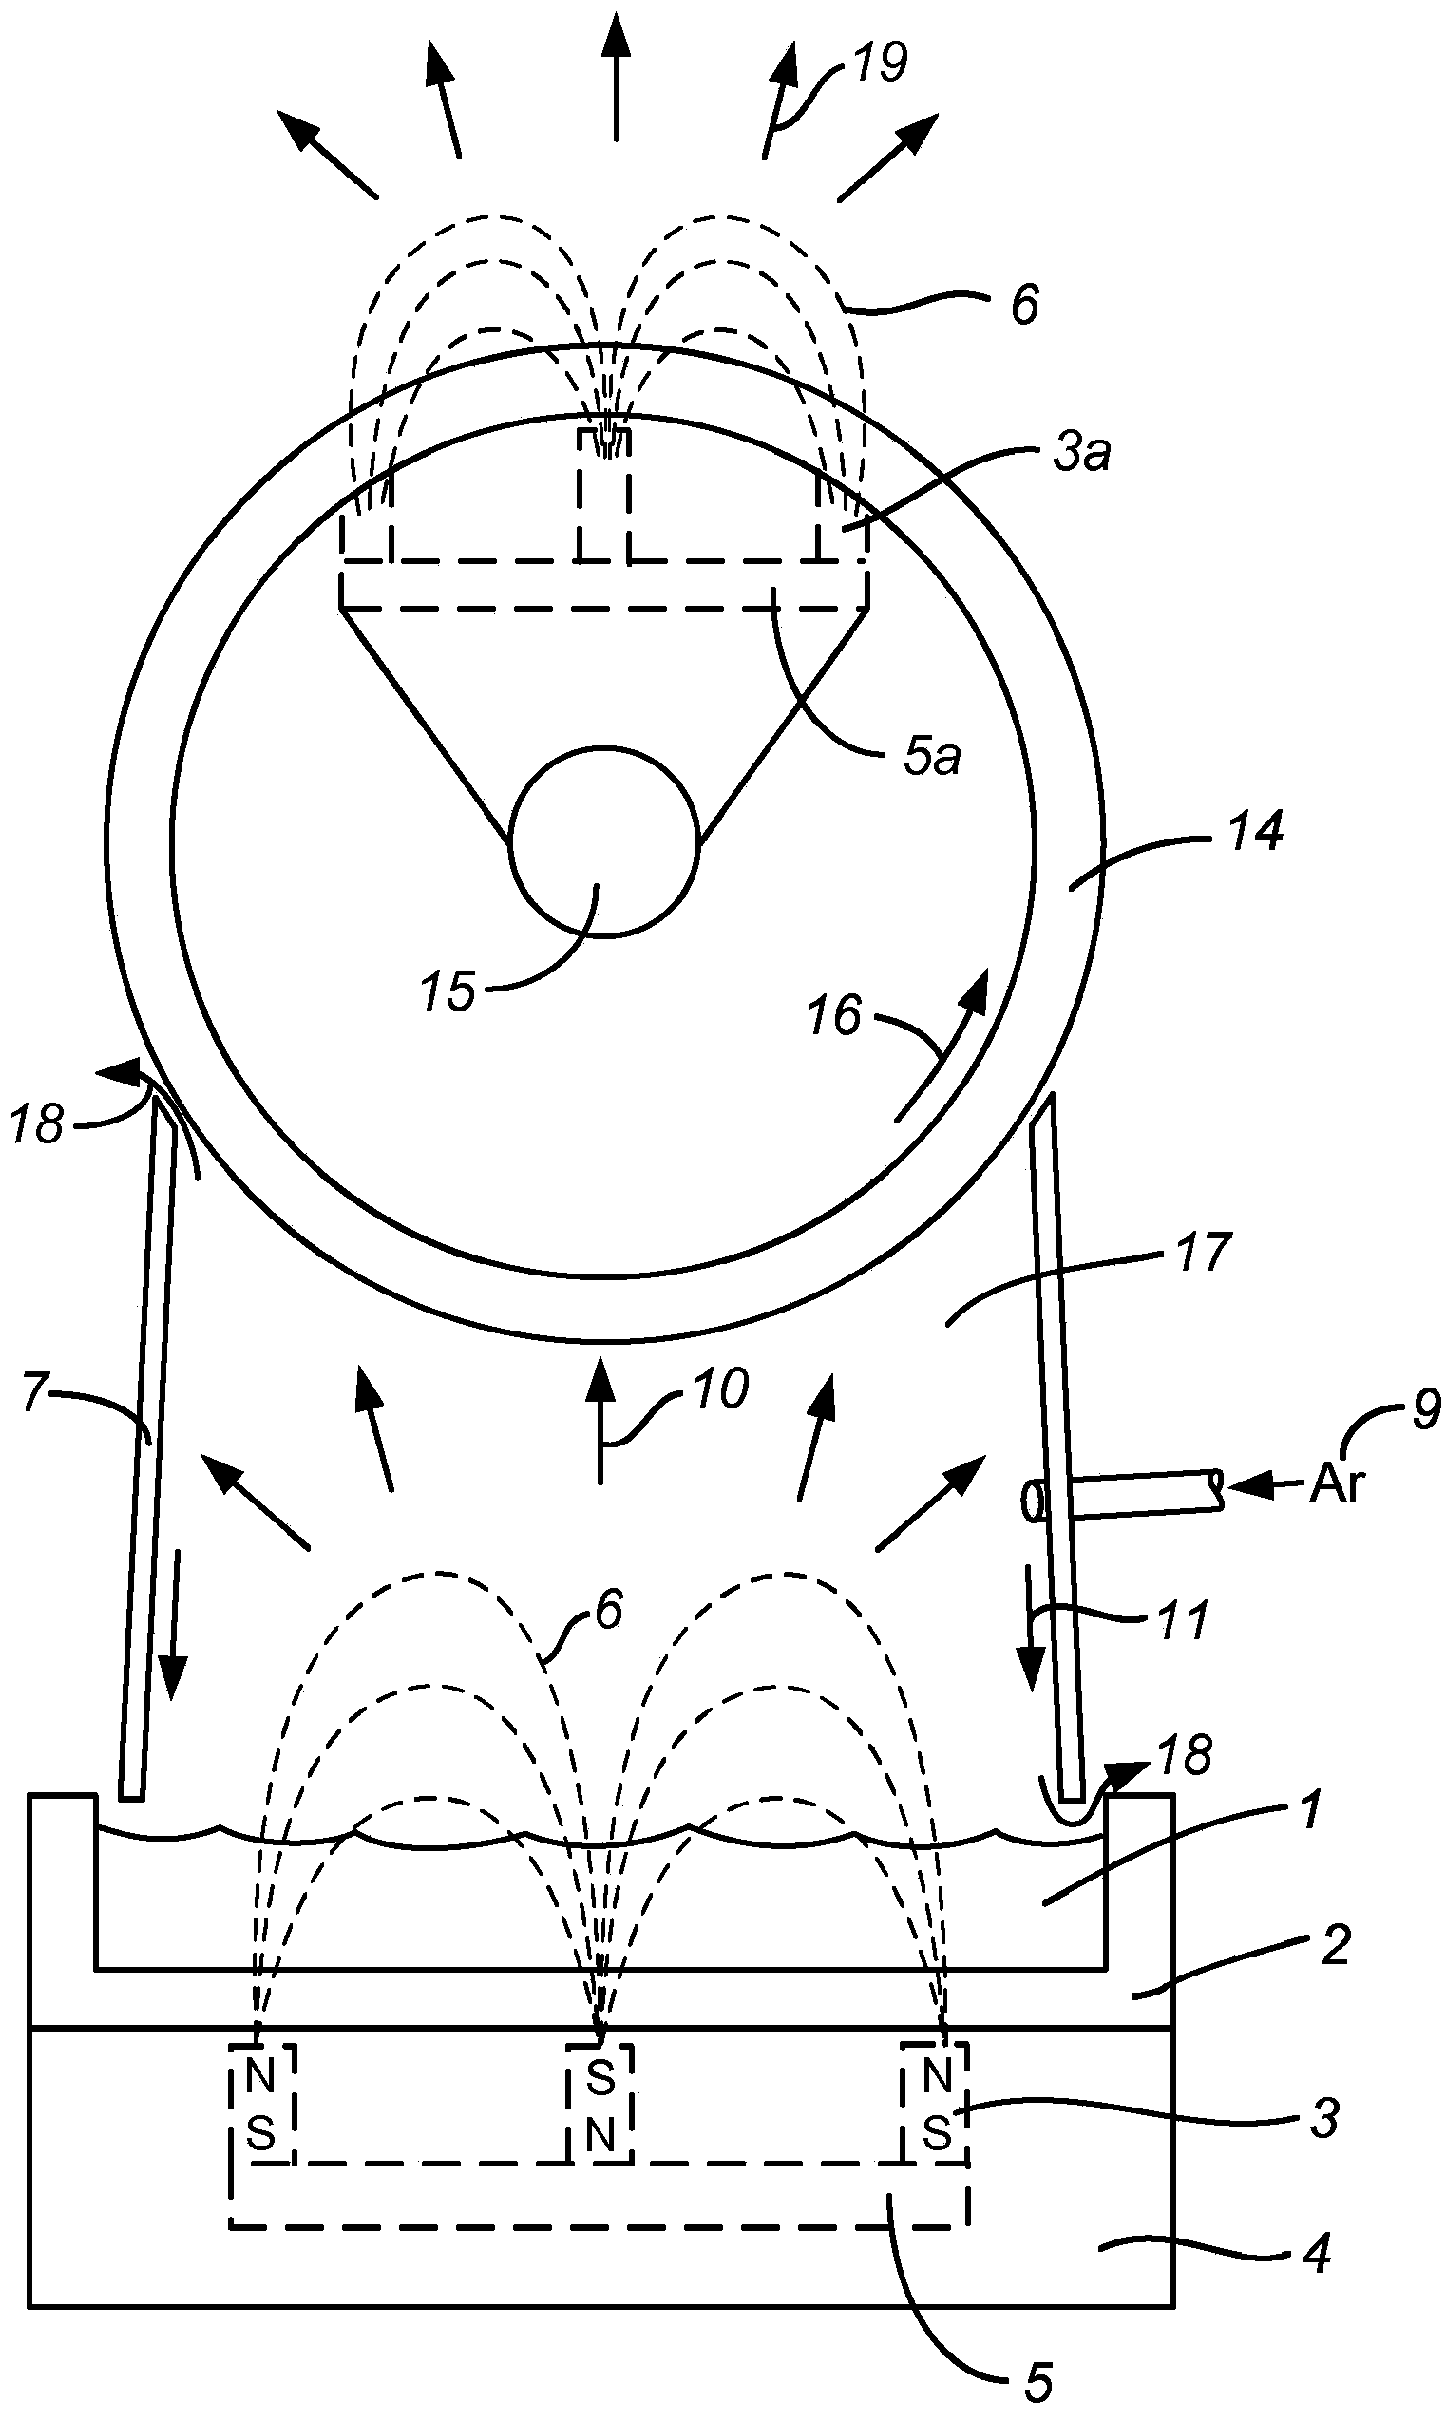 Sputtering systems for liquid target materials